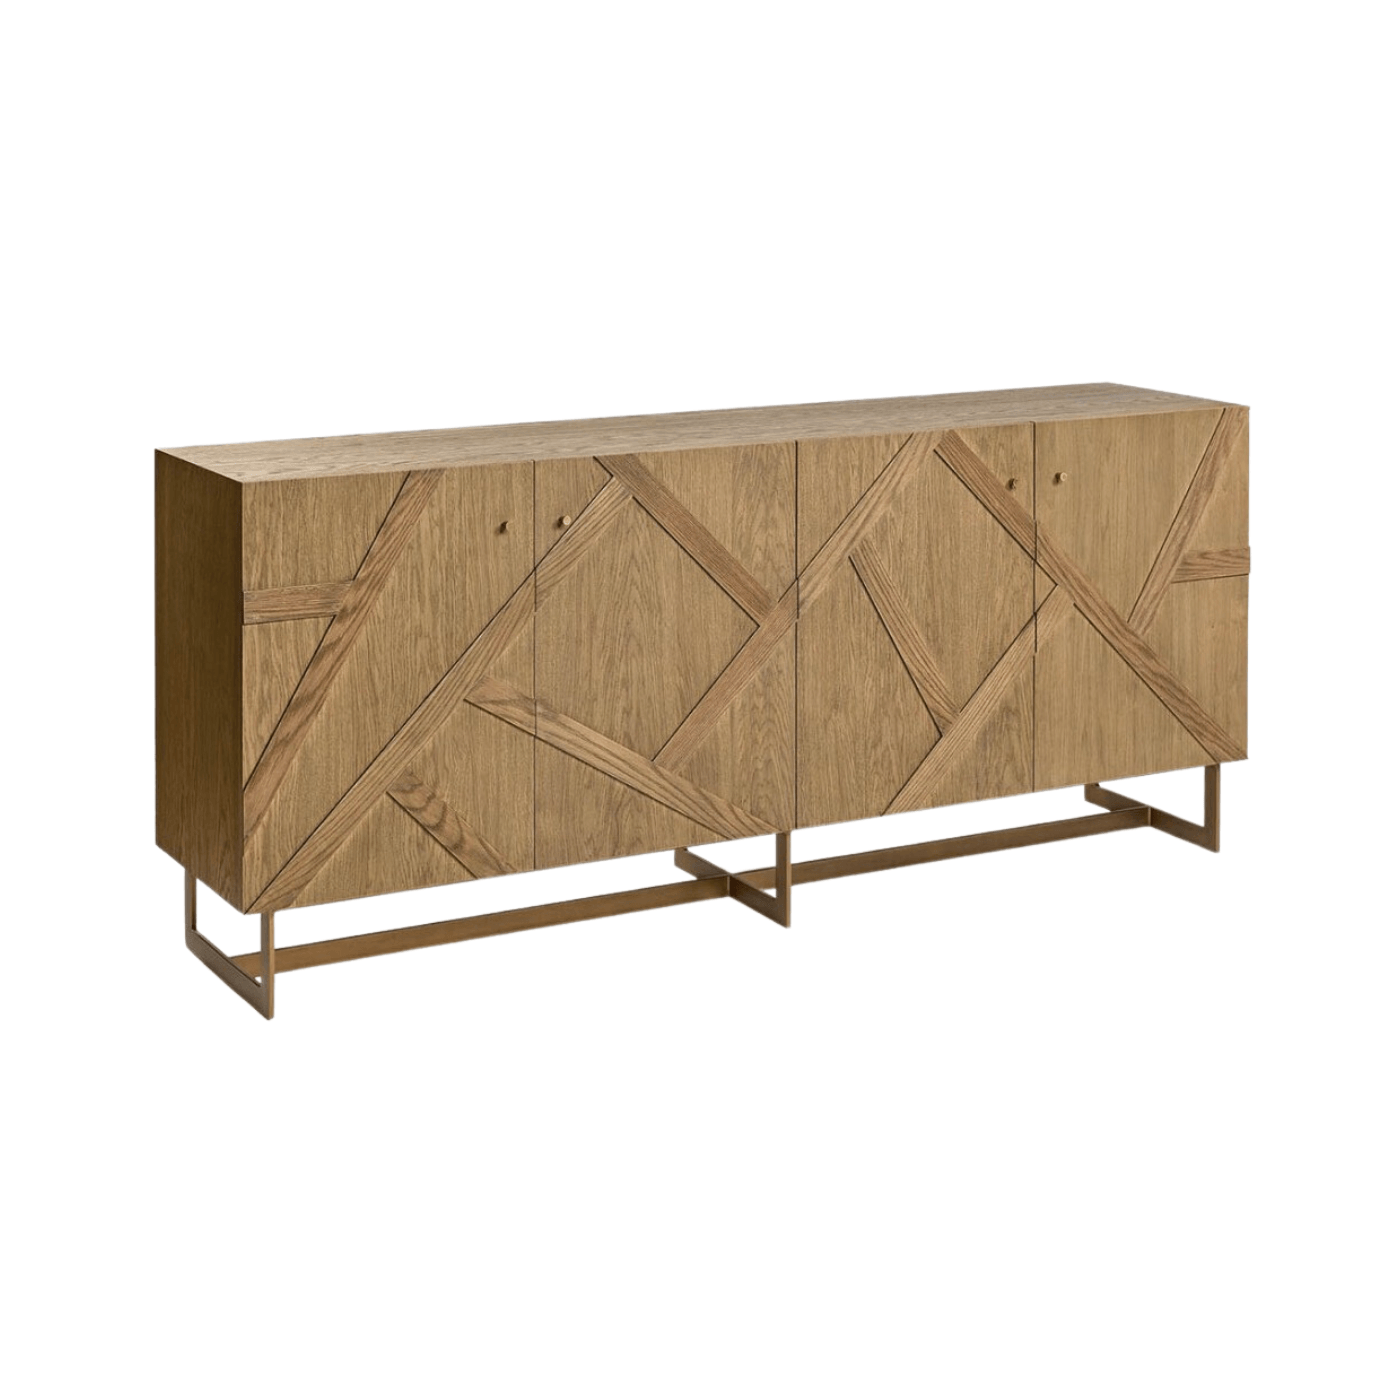 Olmo Natural Oak Sideboard with Gold Metal Legs - Maison Rêves UK